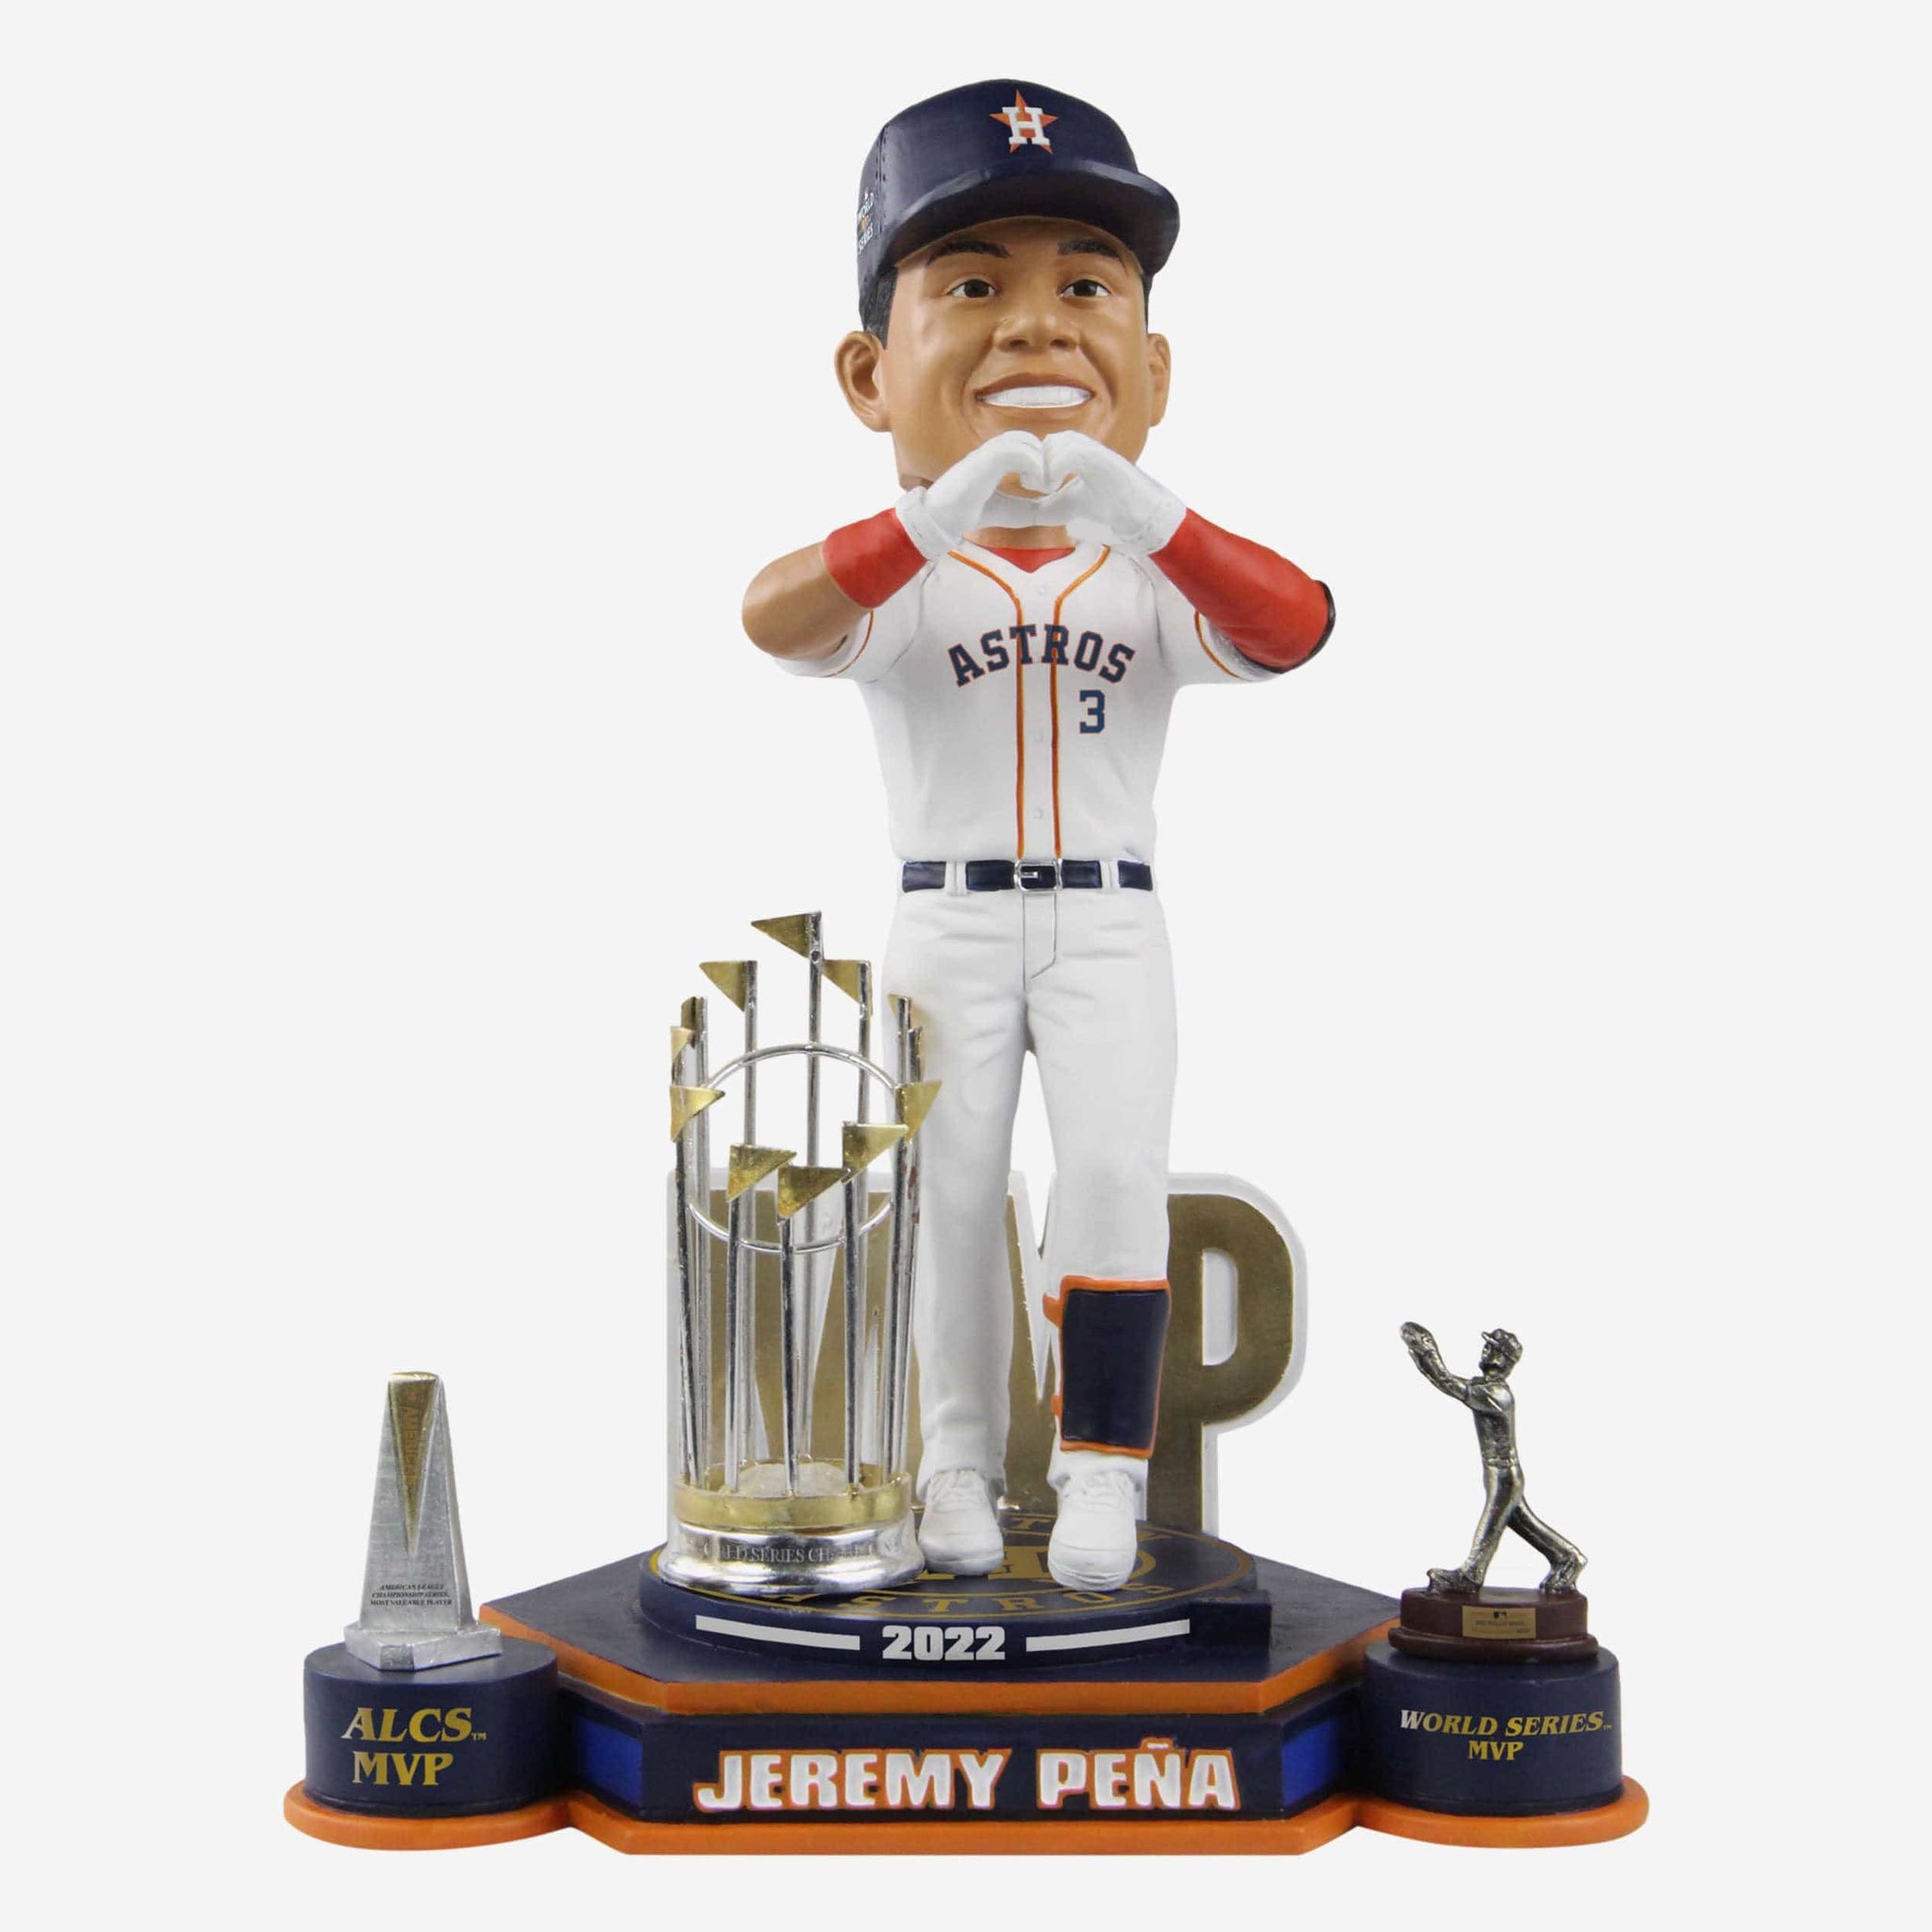 Jeremy Pena 2022 Game-Used Jersey. ALCS Game 4.